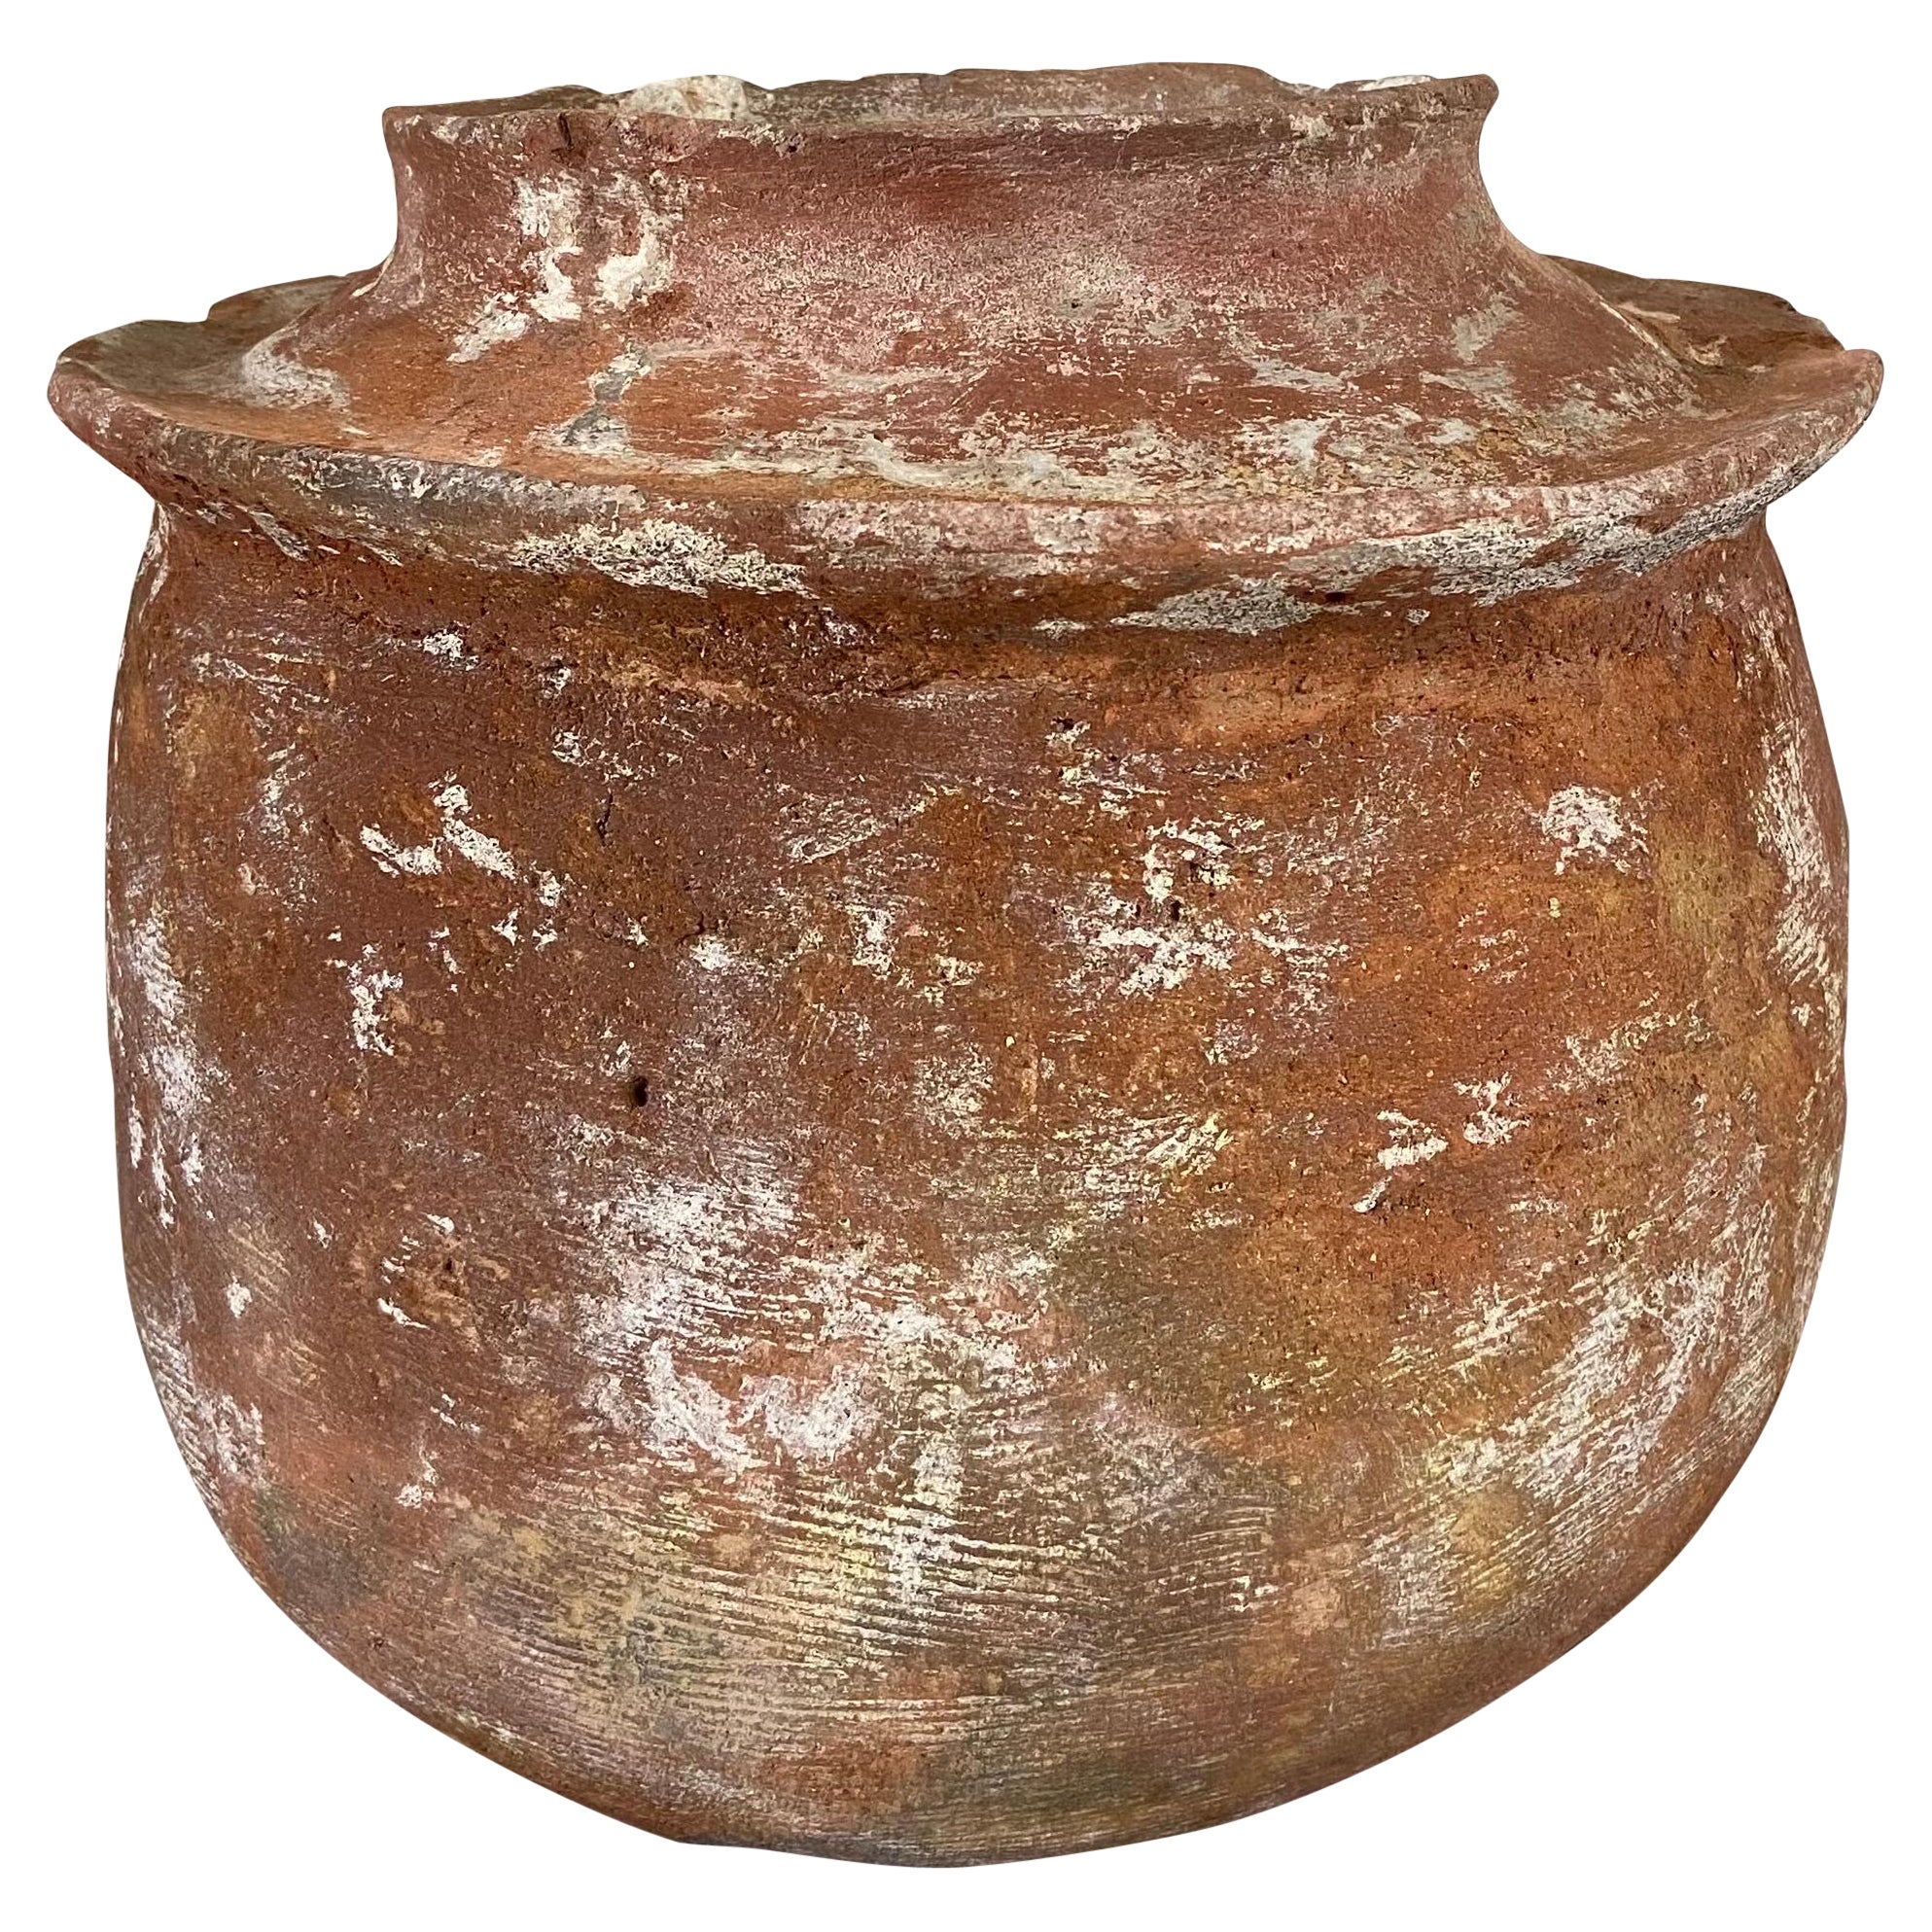 Early 20th Century Terracotta Water Vessel from Mexico